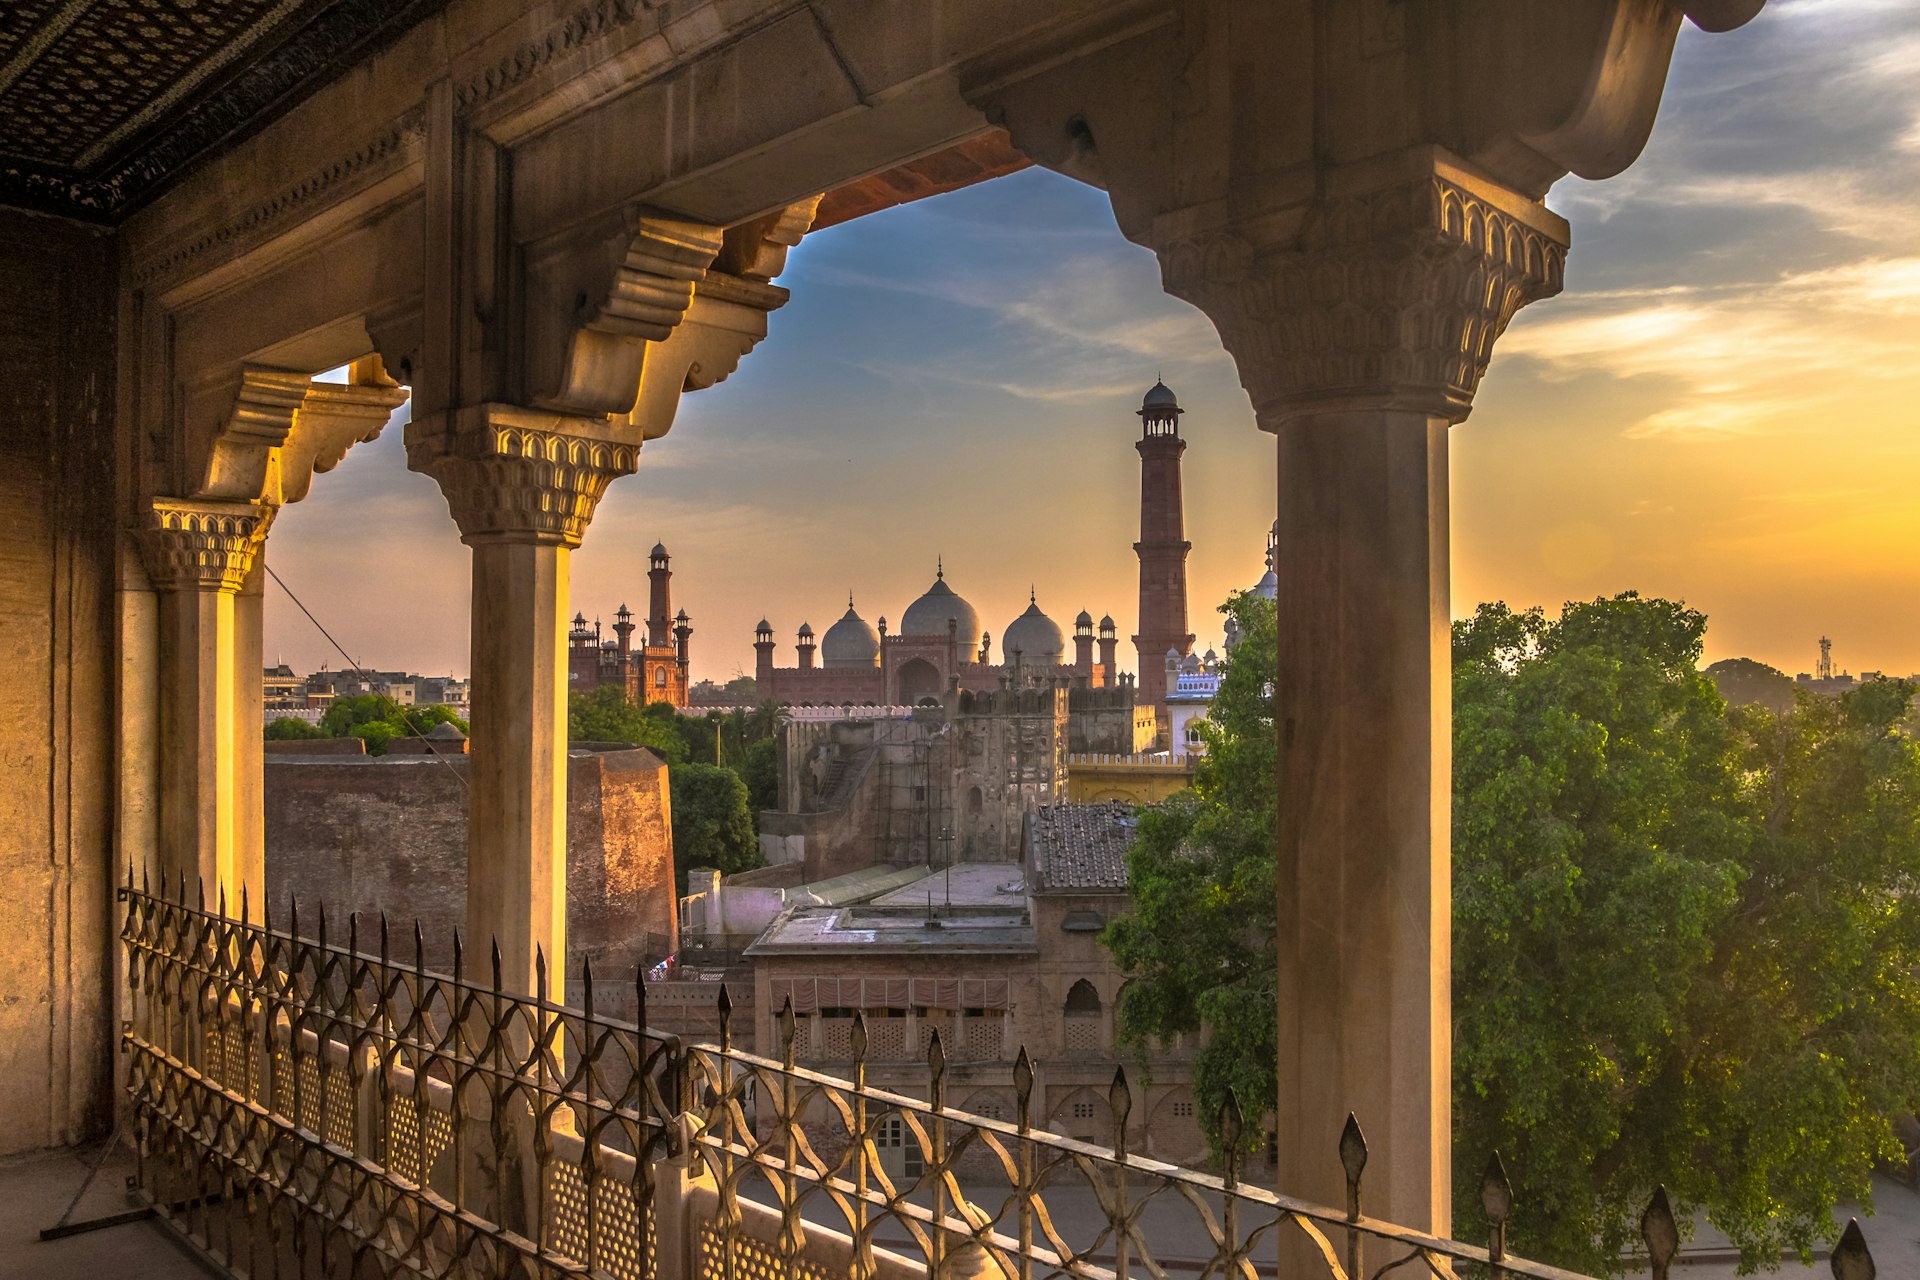 A picture of the Lahore Grand Mosque at sunset